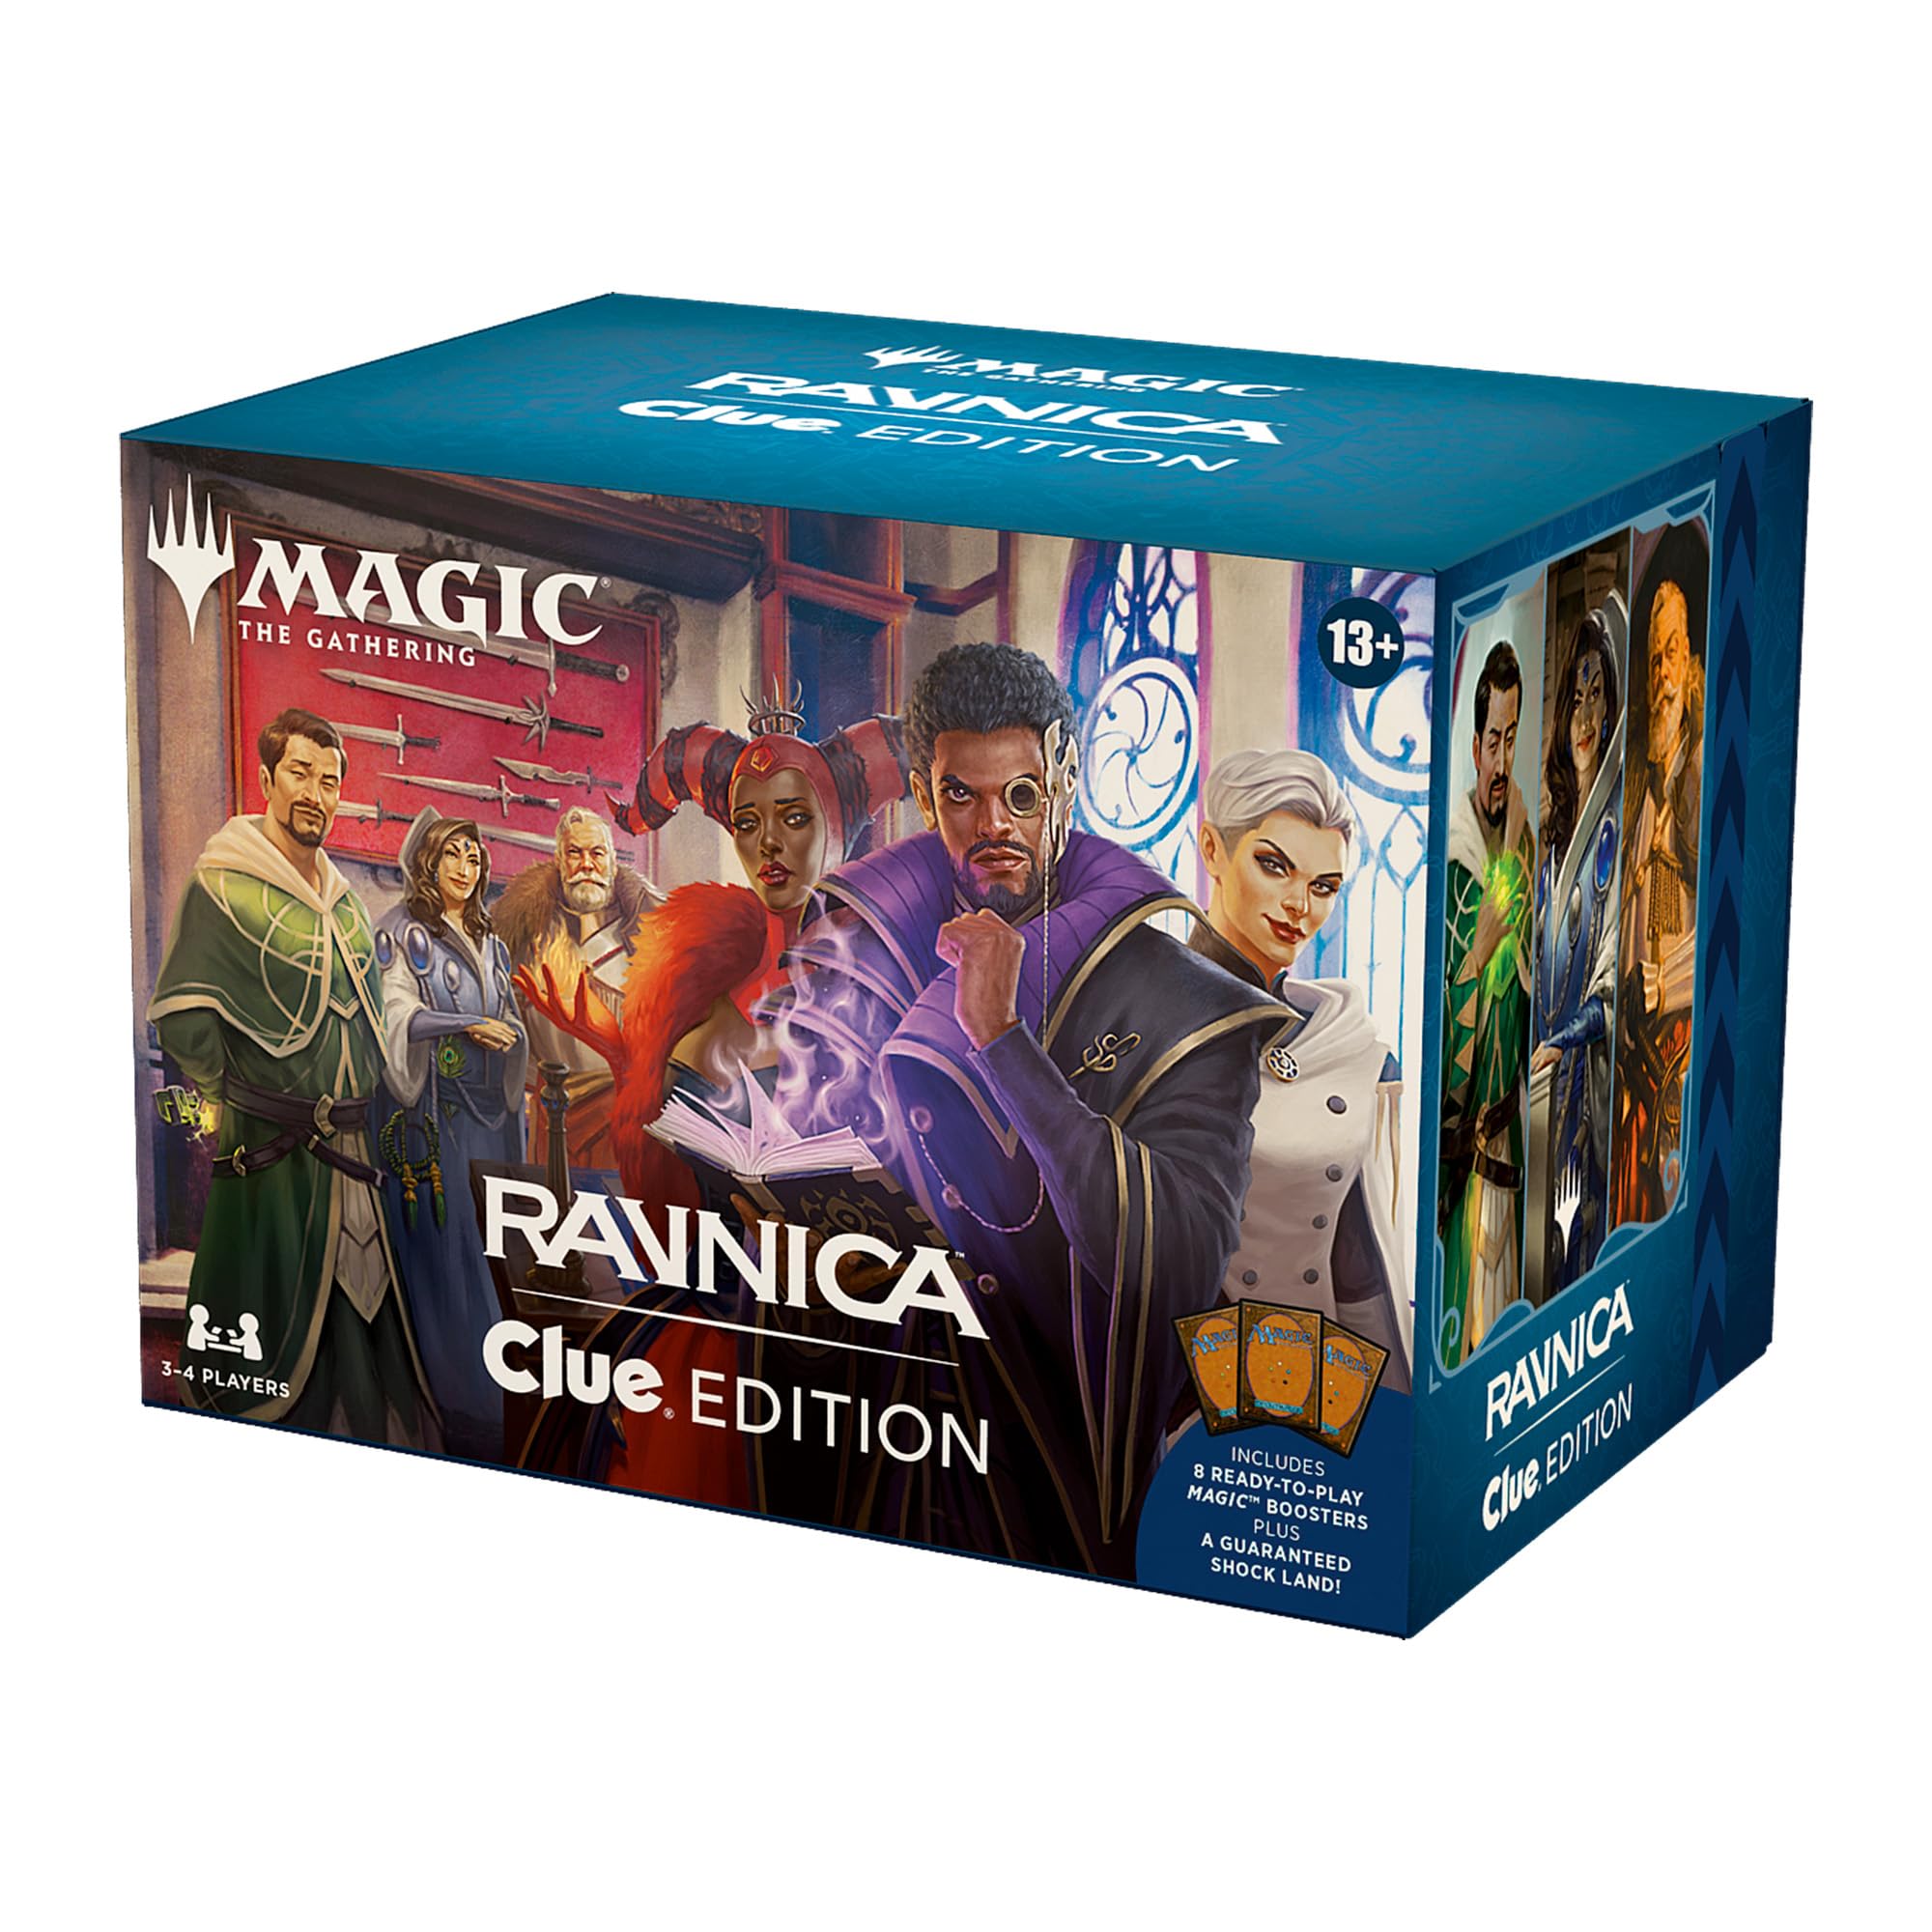 Magic: The Gathering Ravnica: Clue Edition  $49.00 + Free Shipping